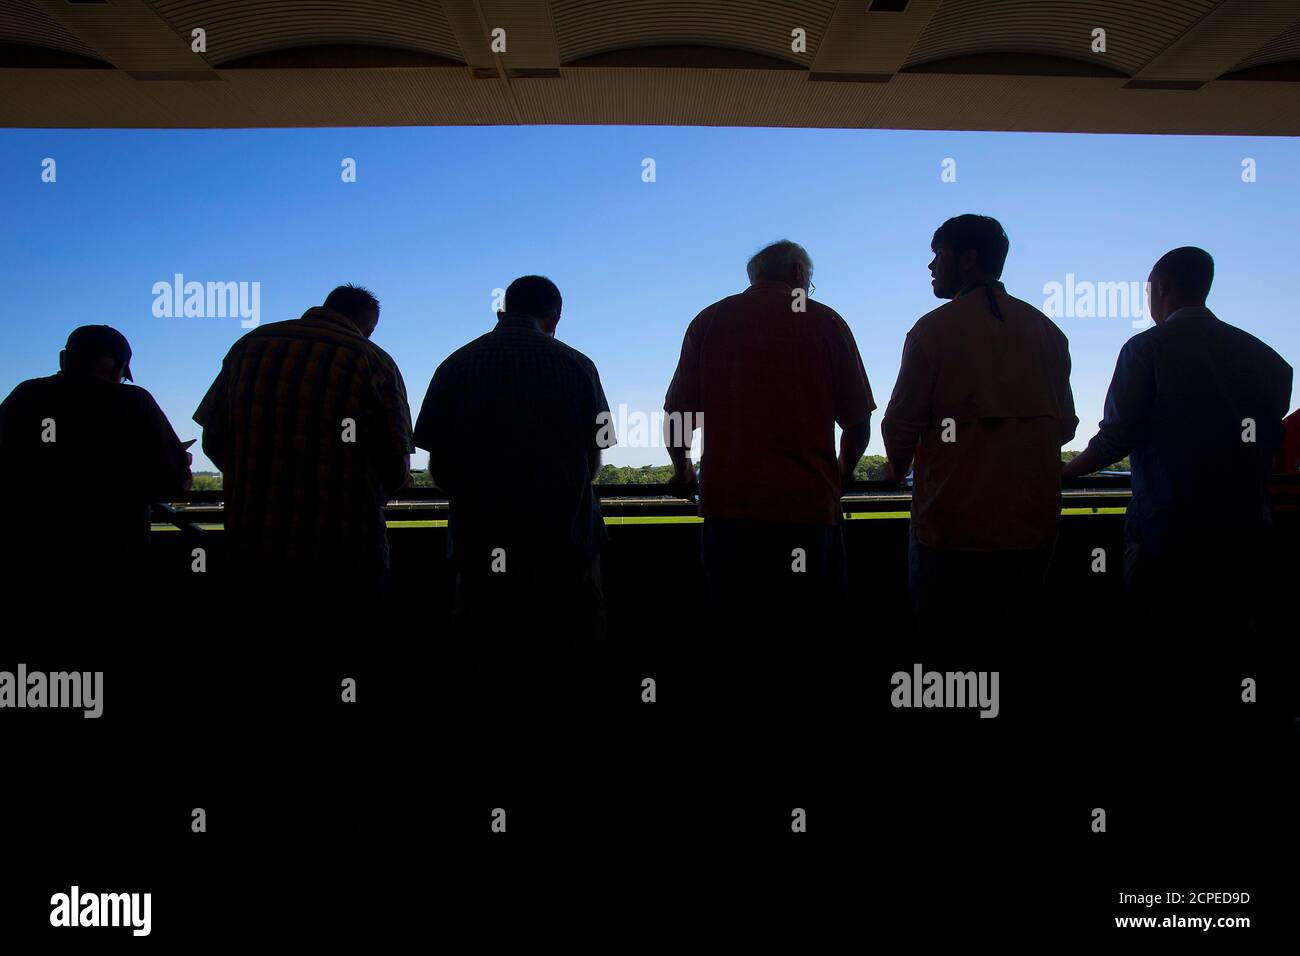 Men line up to watch an early race before the 2014 Belmont Stakes in Elmont, New York June 7, 2014. REUTERS/Carlo Allegri (UNITED STATES - Tags: SPORT HORSE RACING SOCIETY) Stock Photo